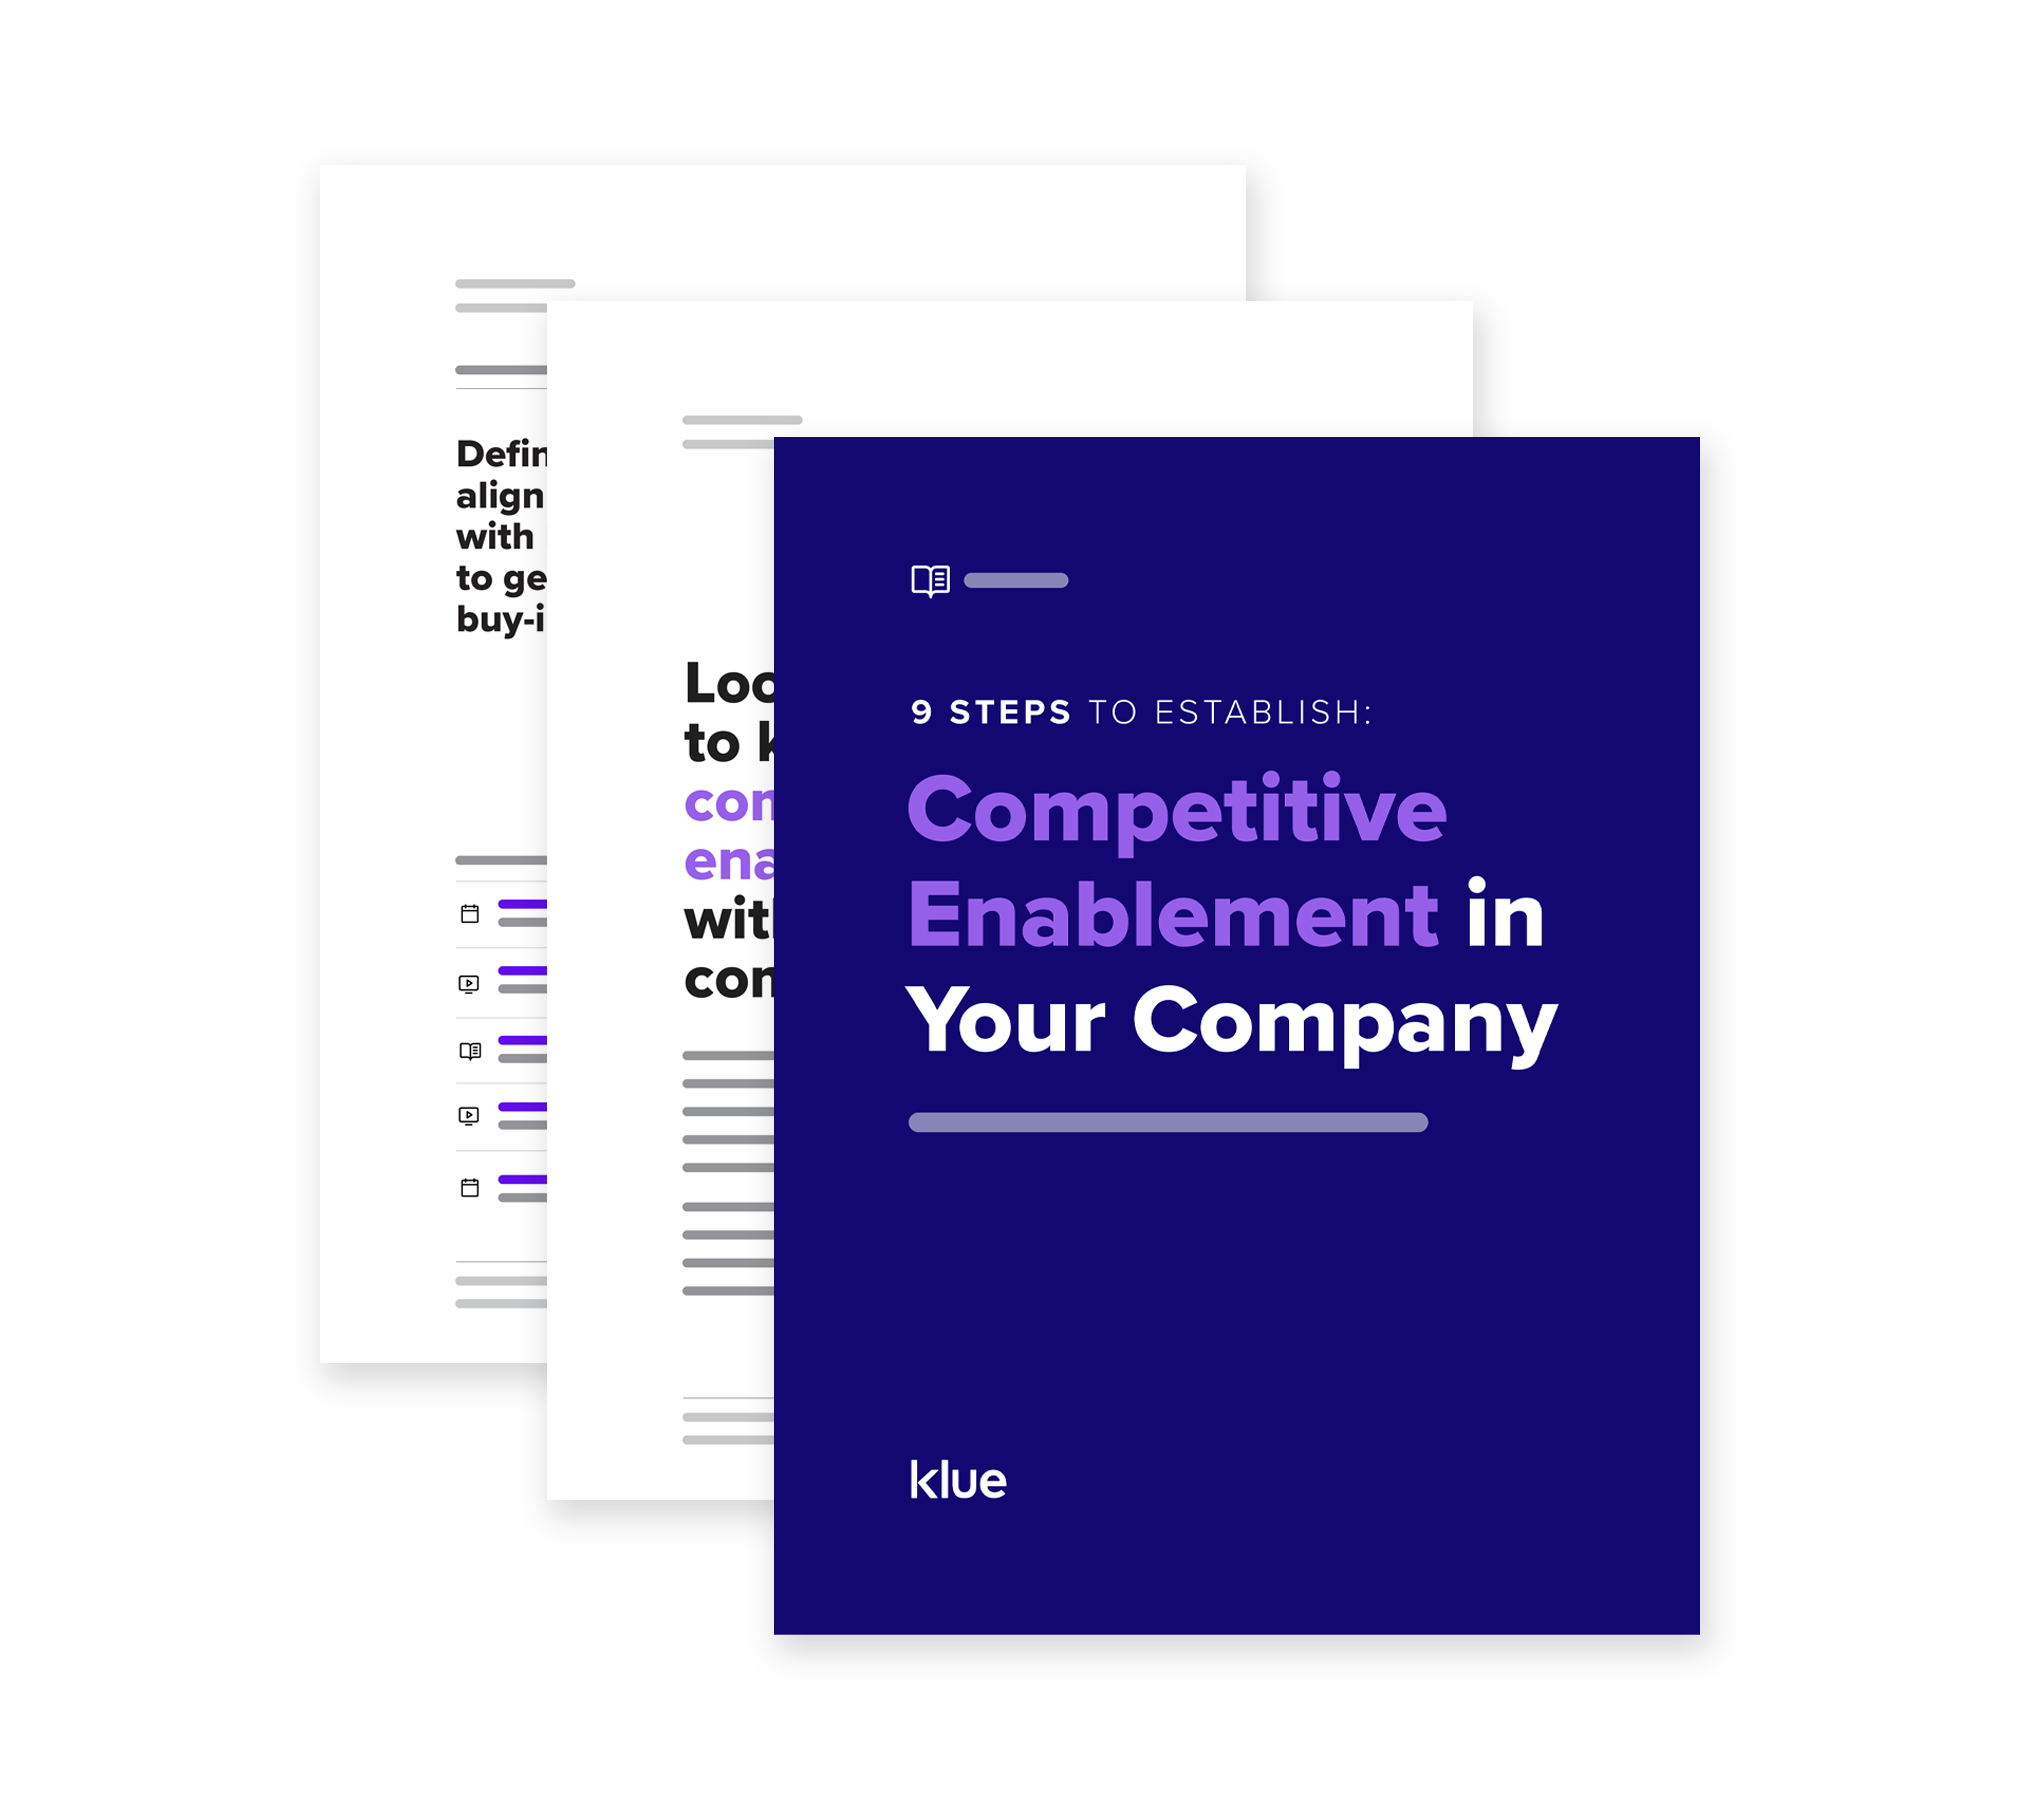 Landing Page - 9 Steps to Establish Competitive Enablement in Your Company